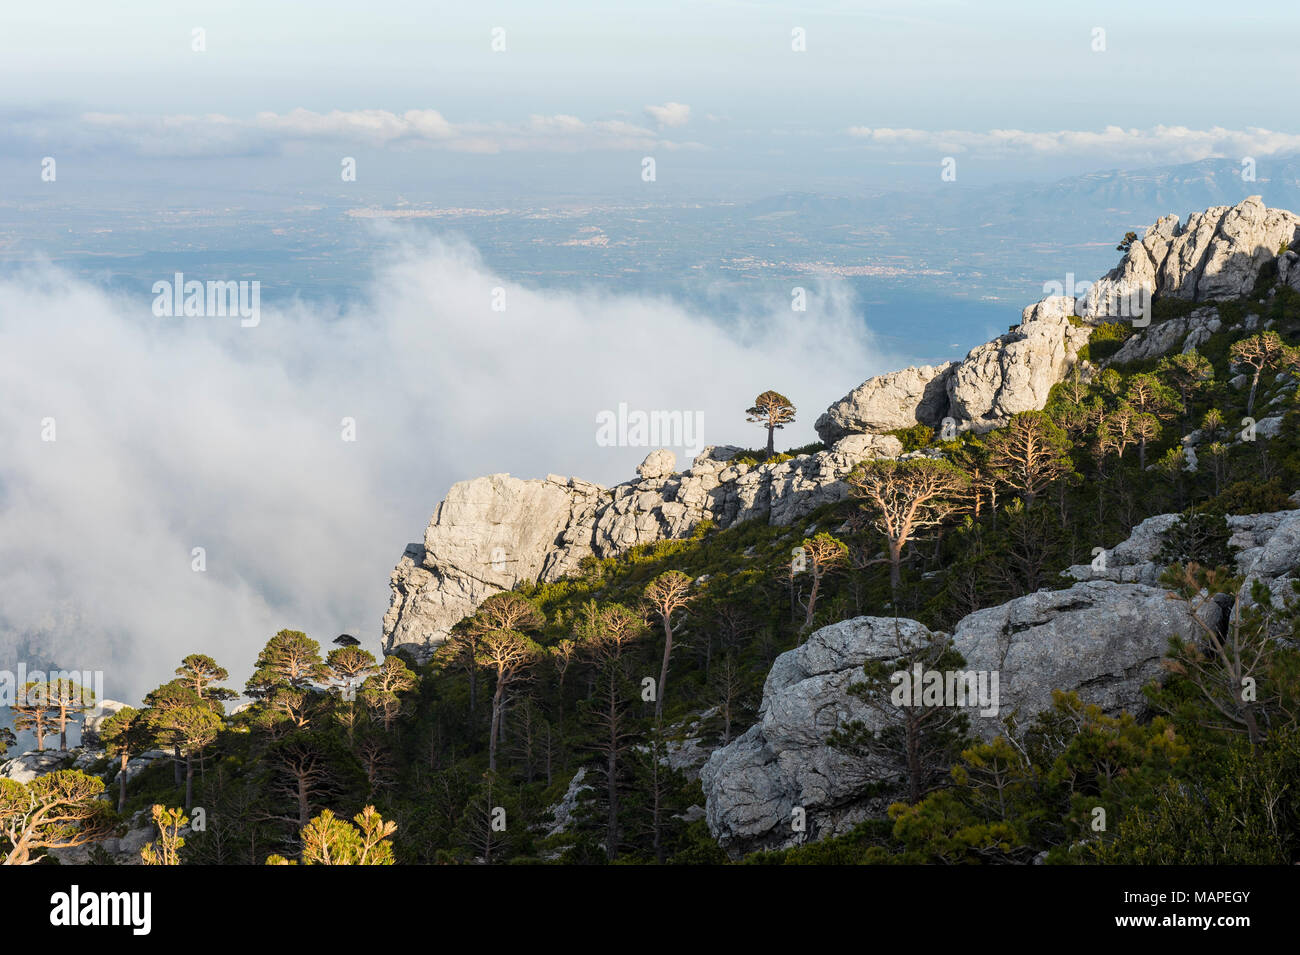 Rocky andscape at Puertos de Beceite (Ports de Beceit) with clouds over the mountains and rocks with vegetation in the foreground, Spain Stock Photo